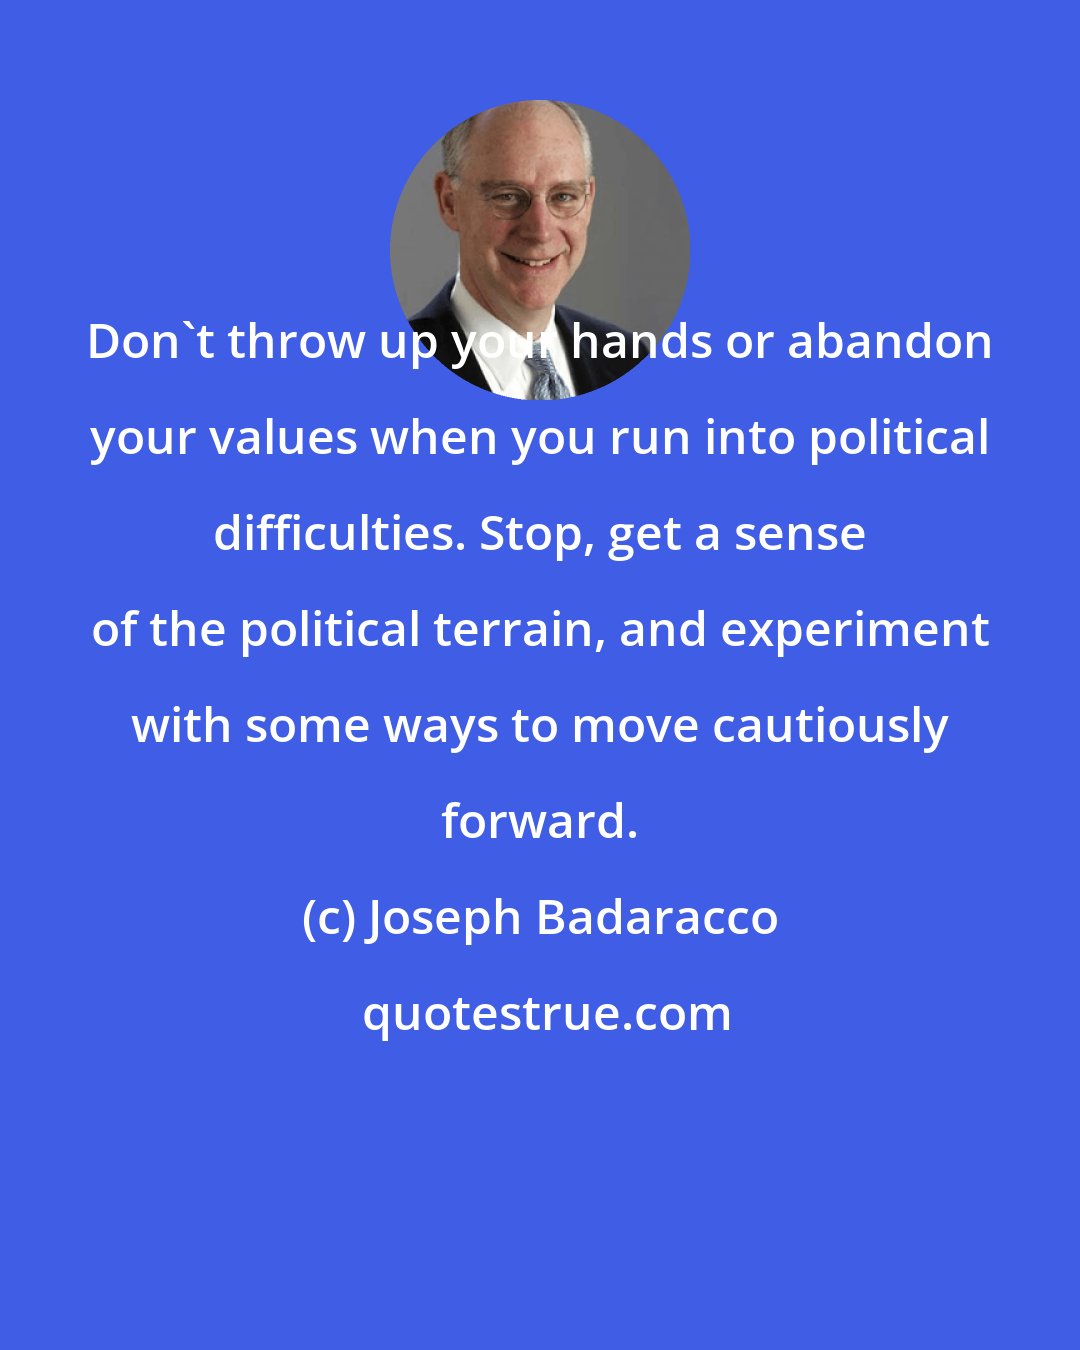 Joseph Badaracco: Don't throw up your hands or abandon your values when you run into political difficulties. Stop, get a sense of the political terrain, and experiment with some ways to move cautiously forward.